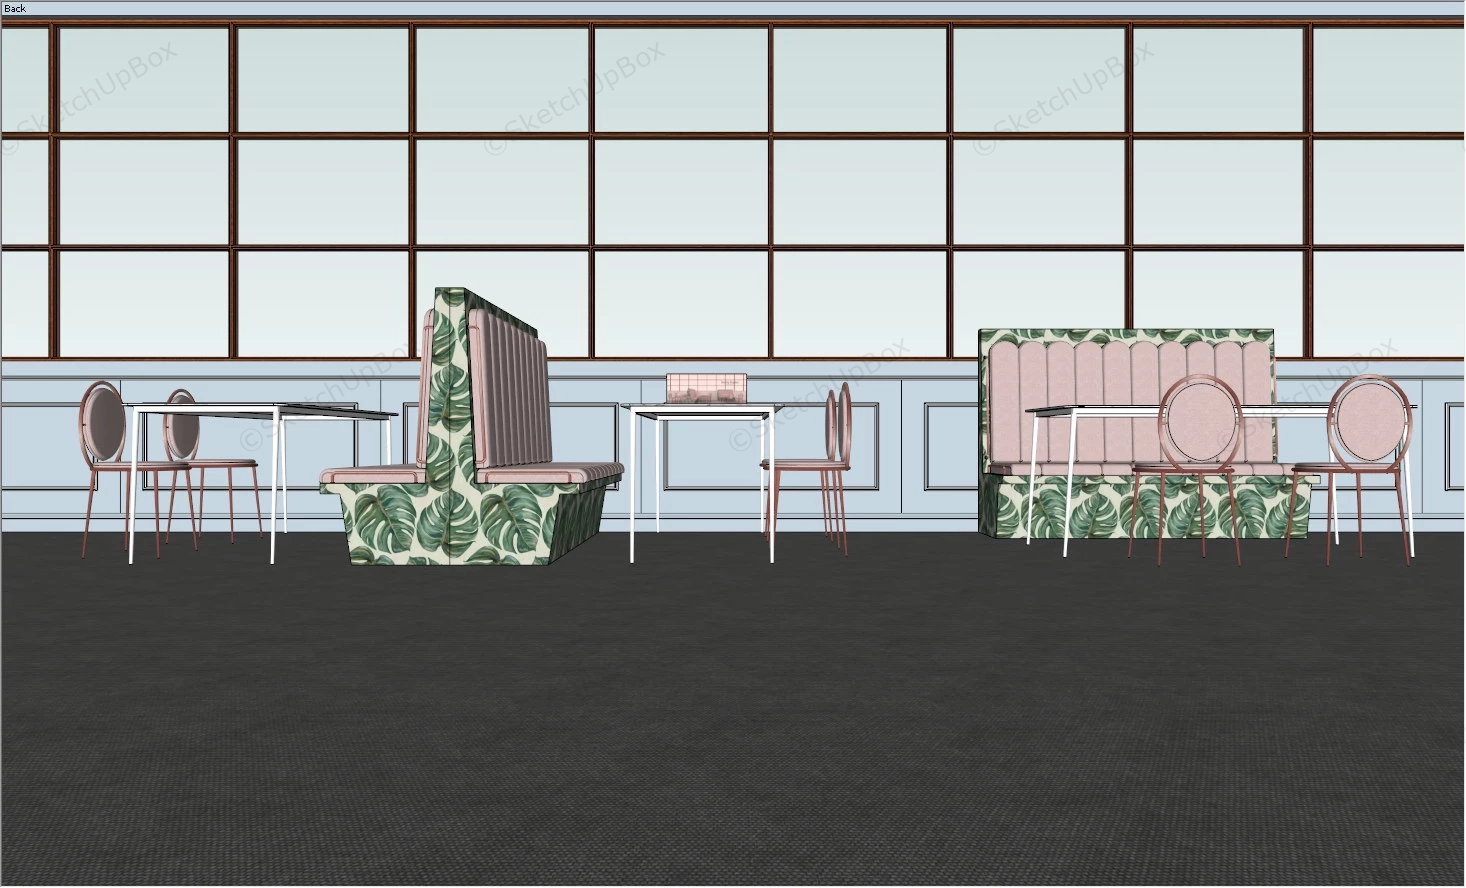 Restaurant Booths And Banquettes sketchup model preview - SketchupBox